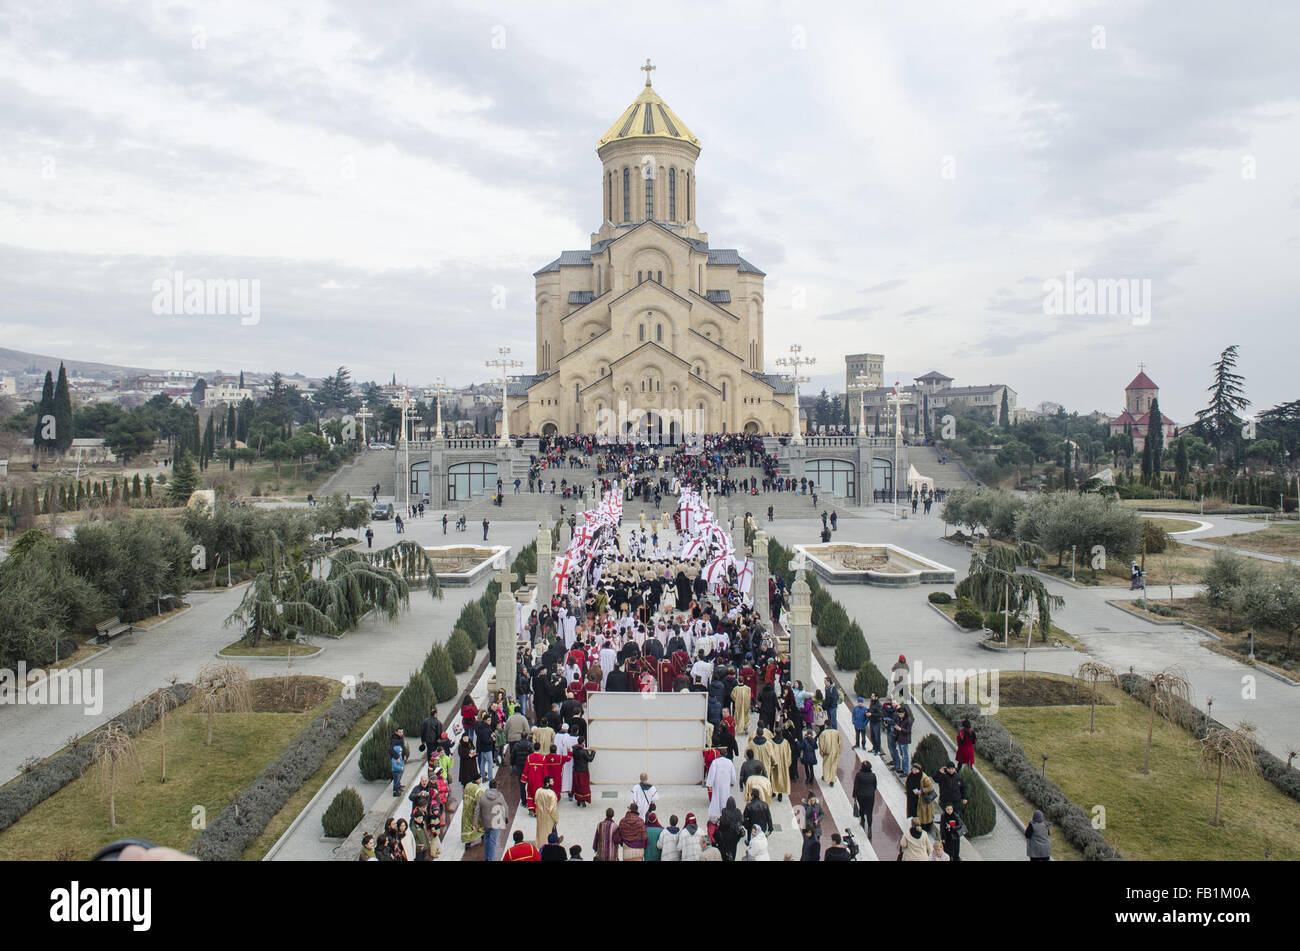 Tbilisi, Georgia. 7th Jan, 2016. Georgian people march during Alilo, a  religious procession, to celebrate the Orthodox Christmas in Tbilisi,  capital of Georgia, on Jan. 7, 2016. Georgians celebrate Christmas on Jan.